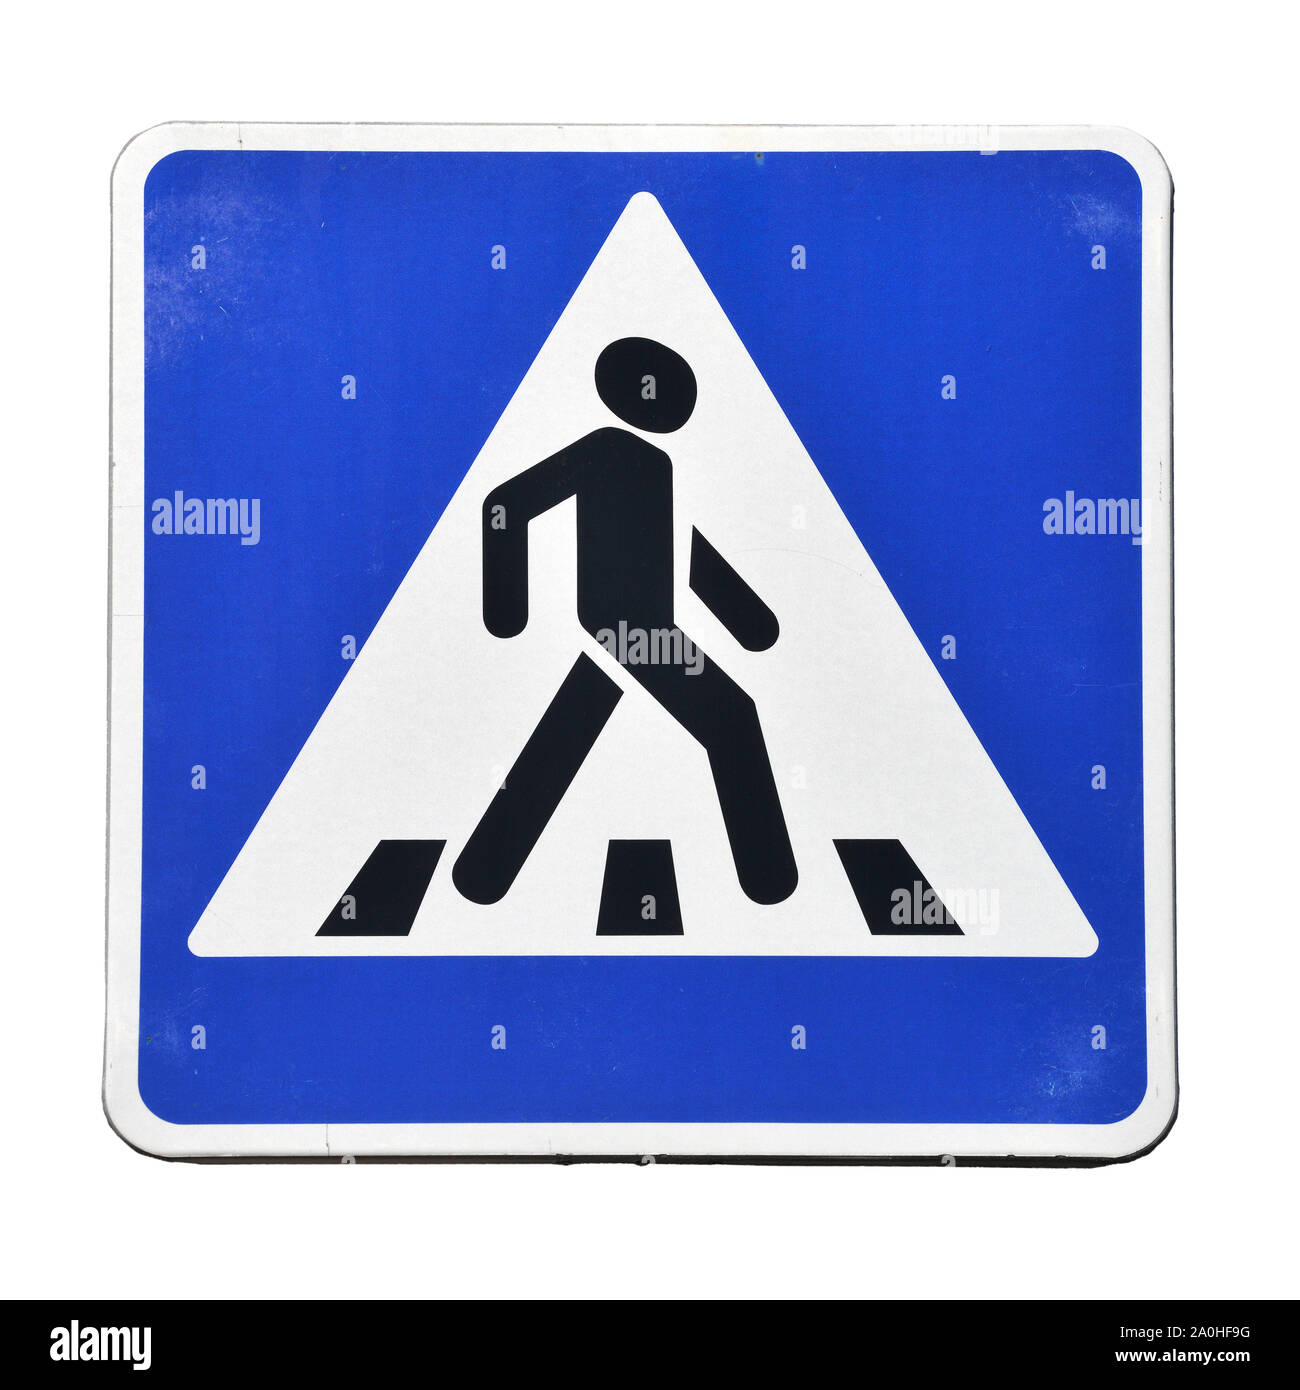 Pedestrian crossing, old road sign isolated on white background Stock Photo